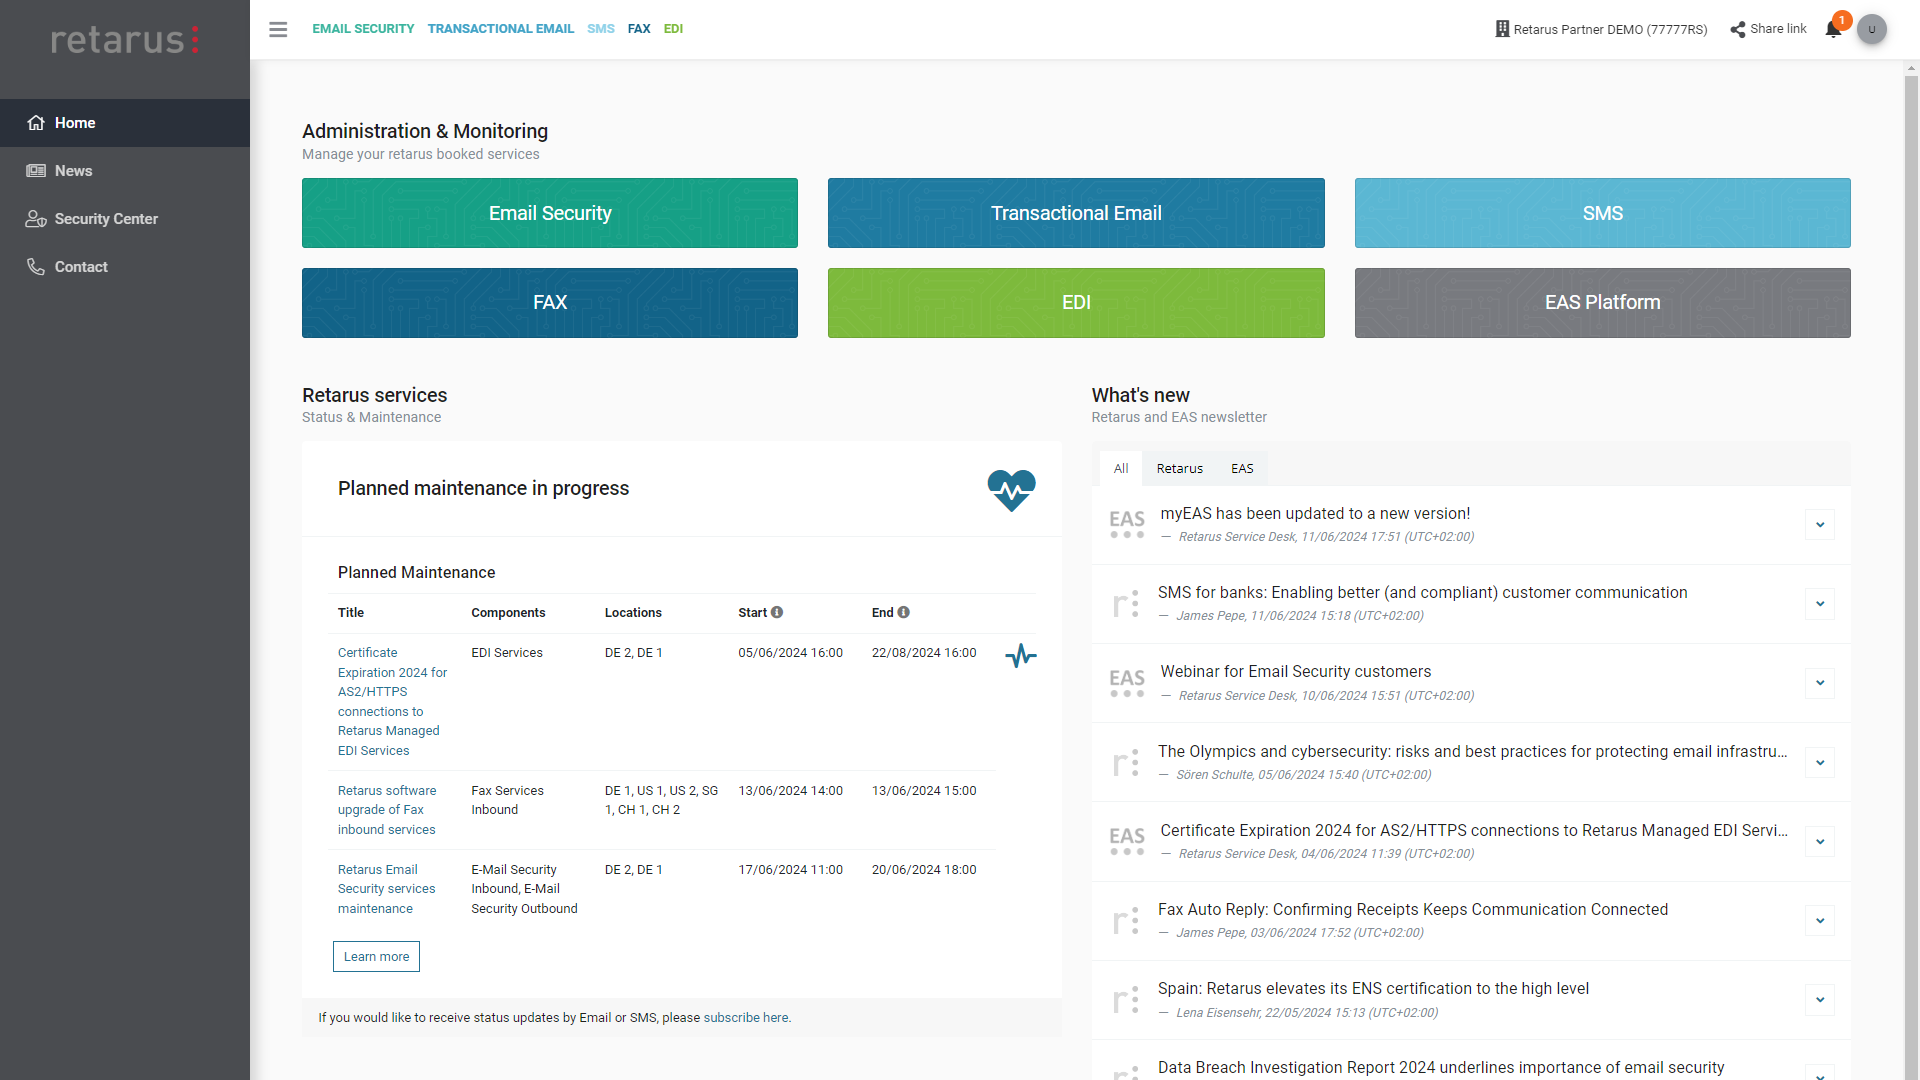 myEAS portal enhancements improve form and functionality